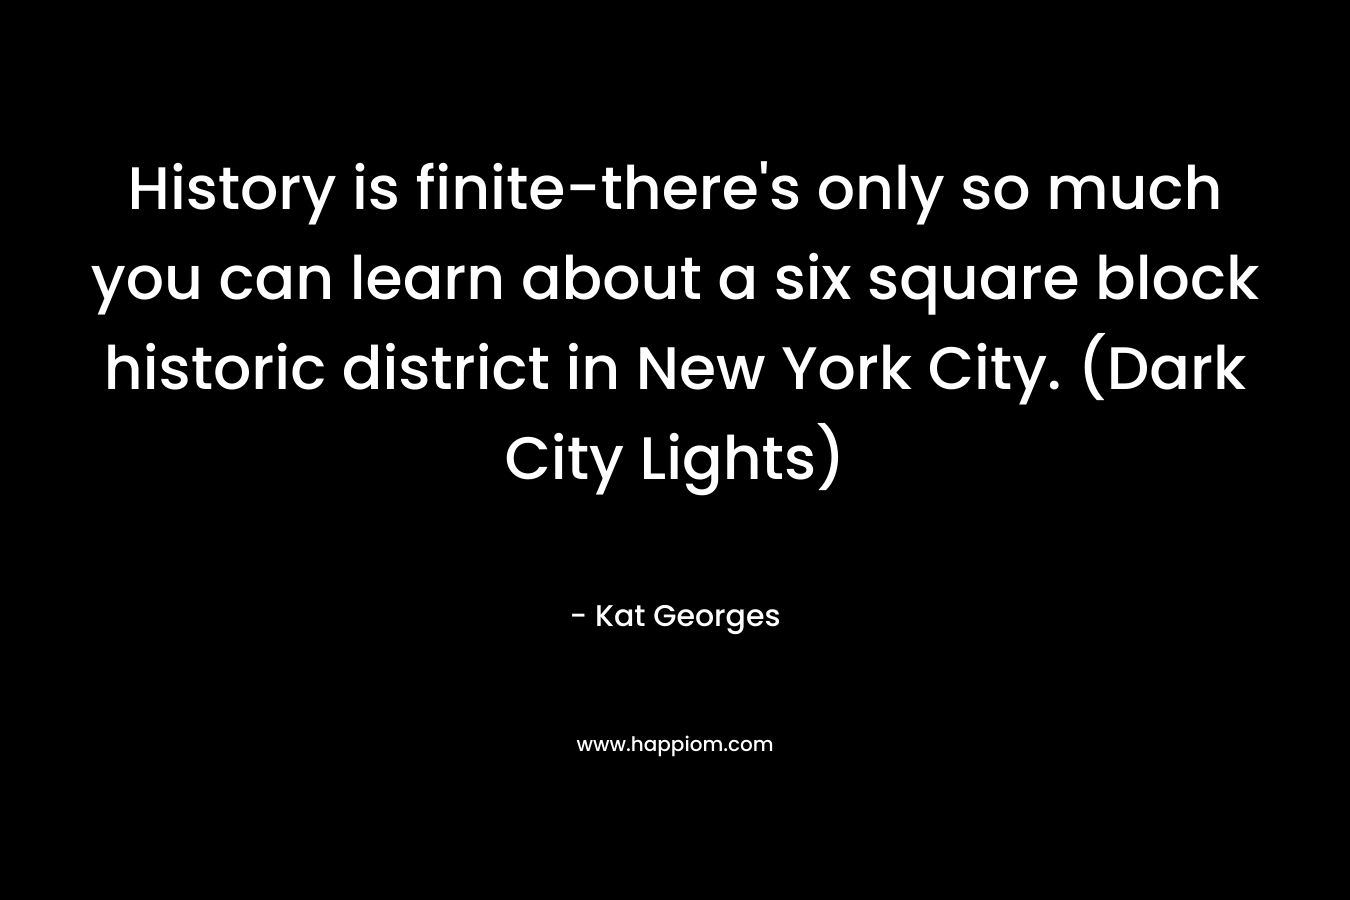 History is finite-there's only so much you can learn about a six square block historic district in New York City. (Dark City Lights)